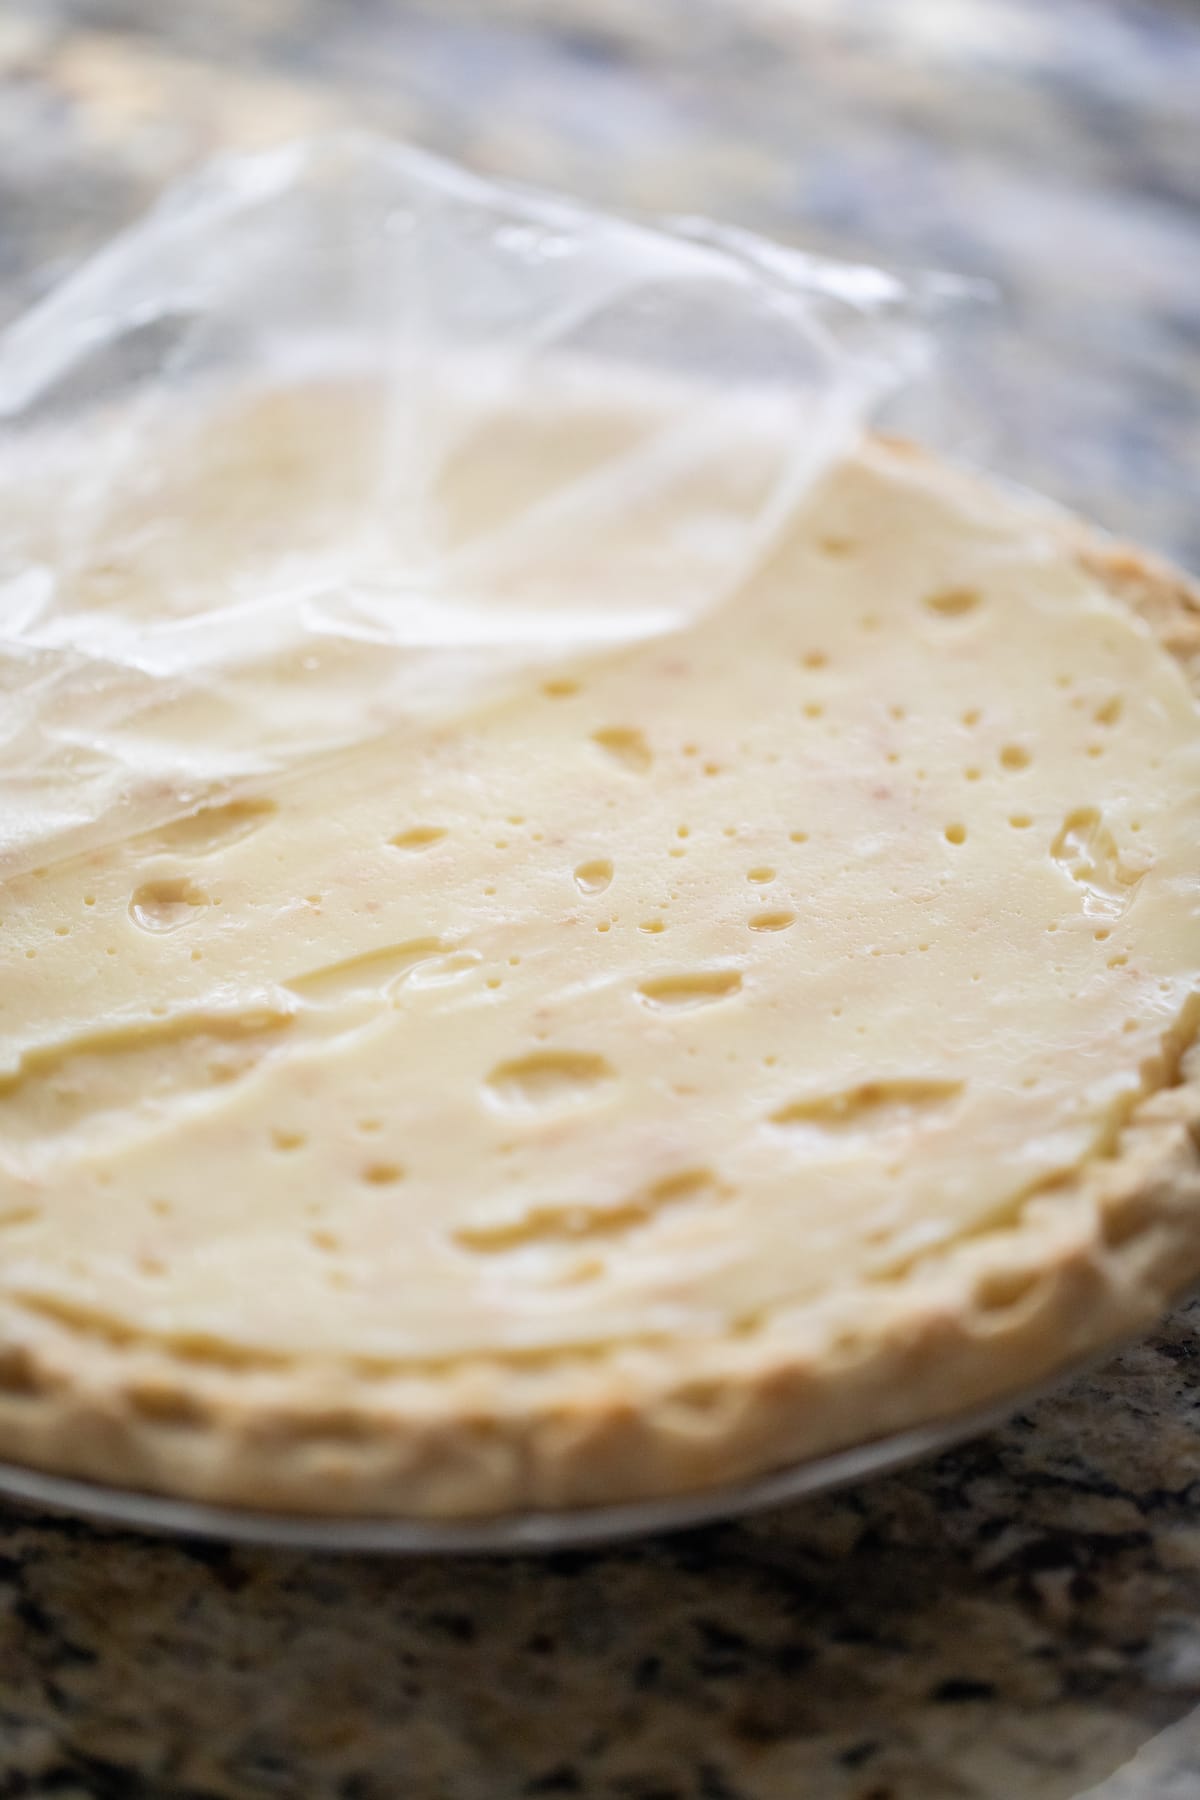 removing plastic wrap from chilled pie